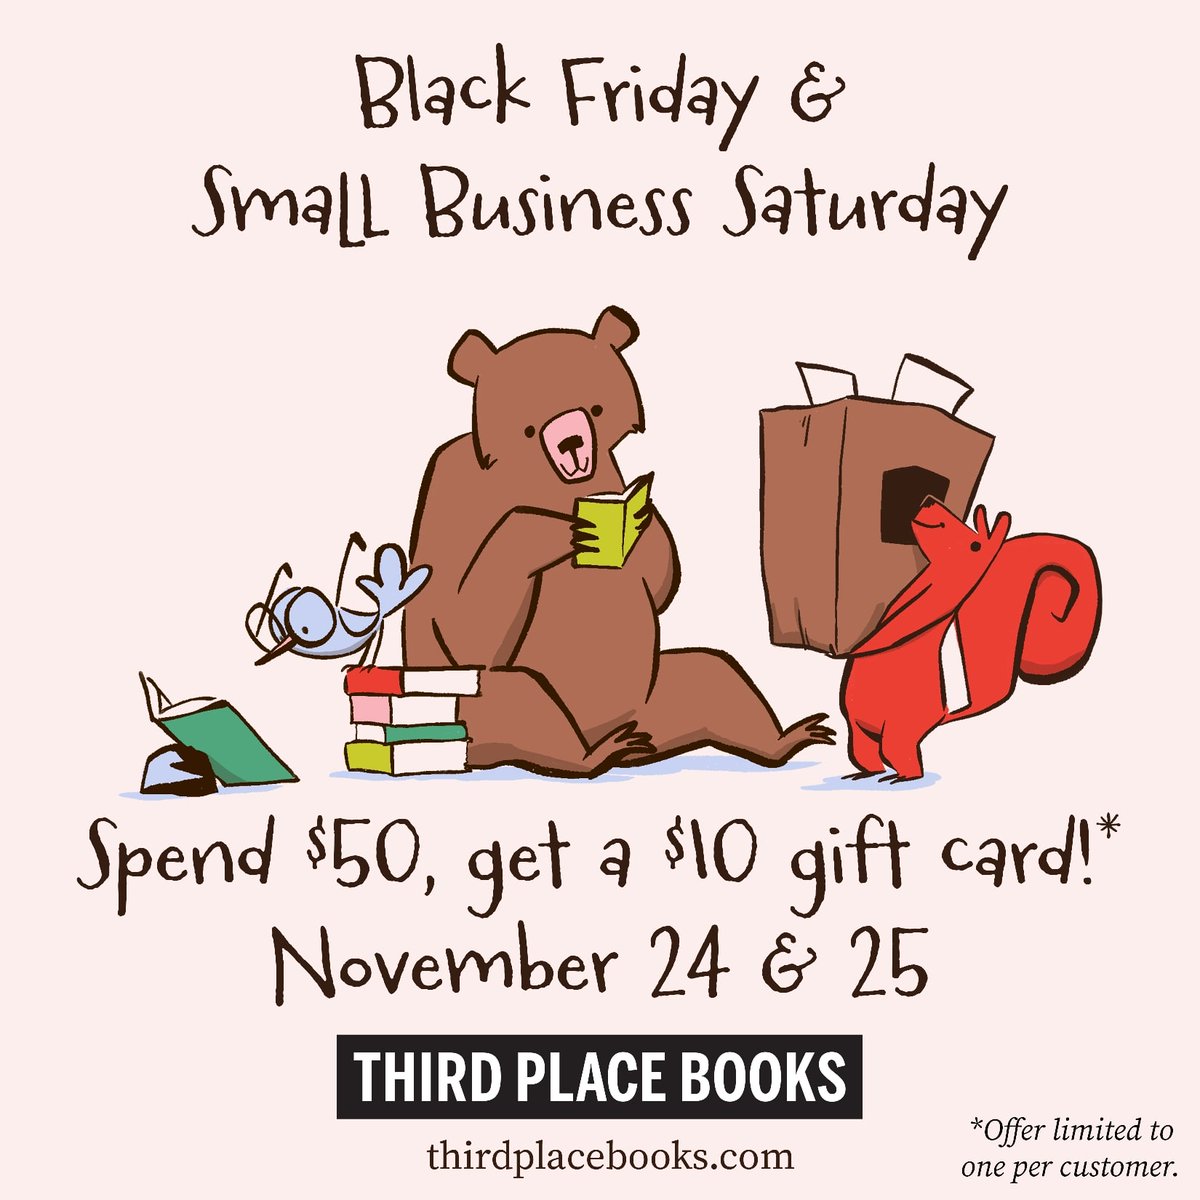 Hey everyone! All three stores will be closed tomorrow for Thanksgiving, but we'll be open Friday regular hours. Don't forget that if you spend $50 dollars, you'll receive a free $10 dollar gift card this Friday and Saturday!